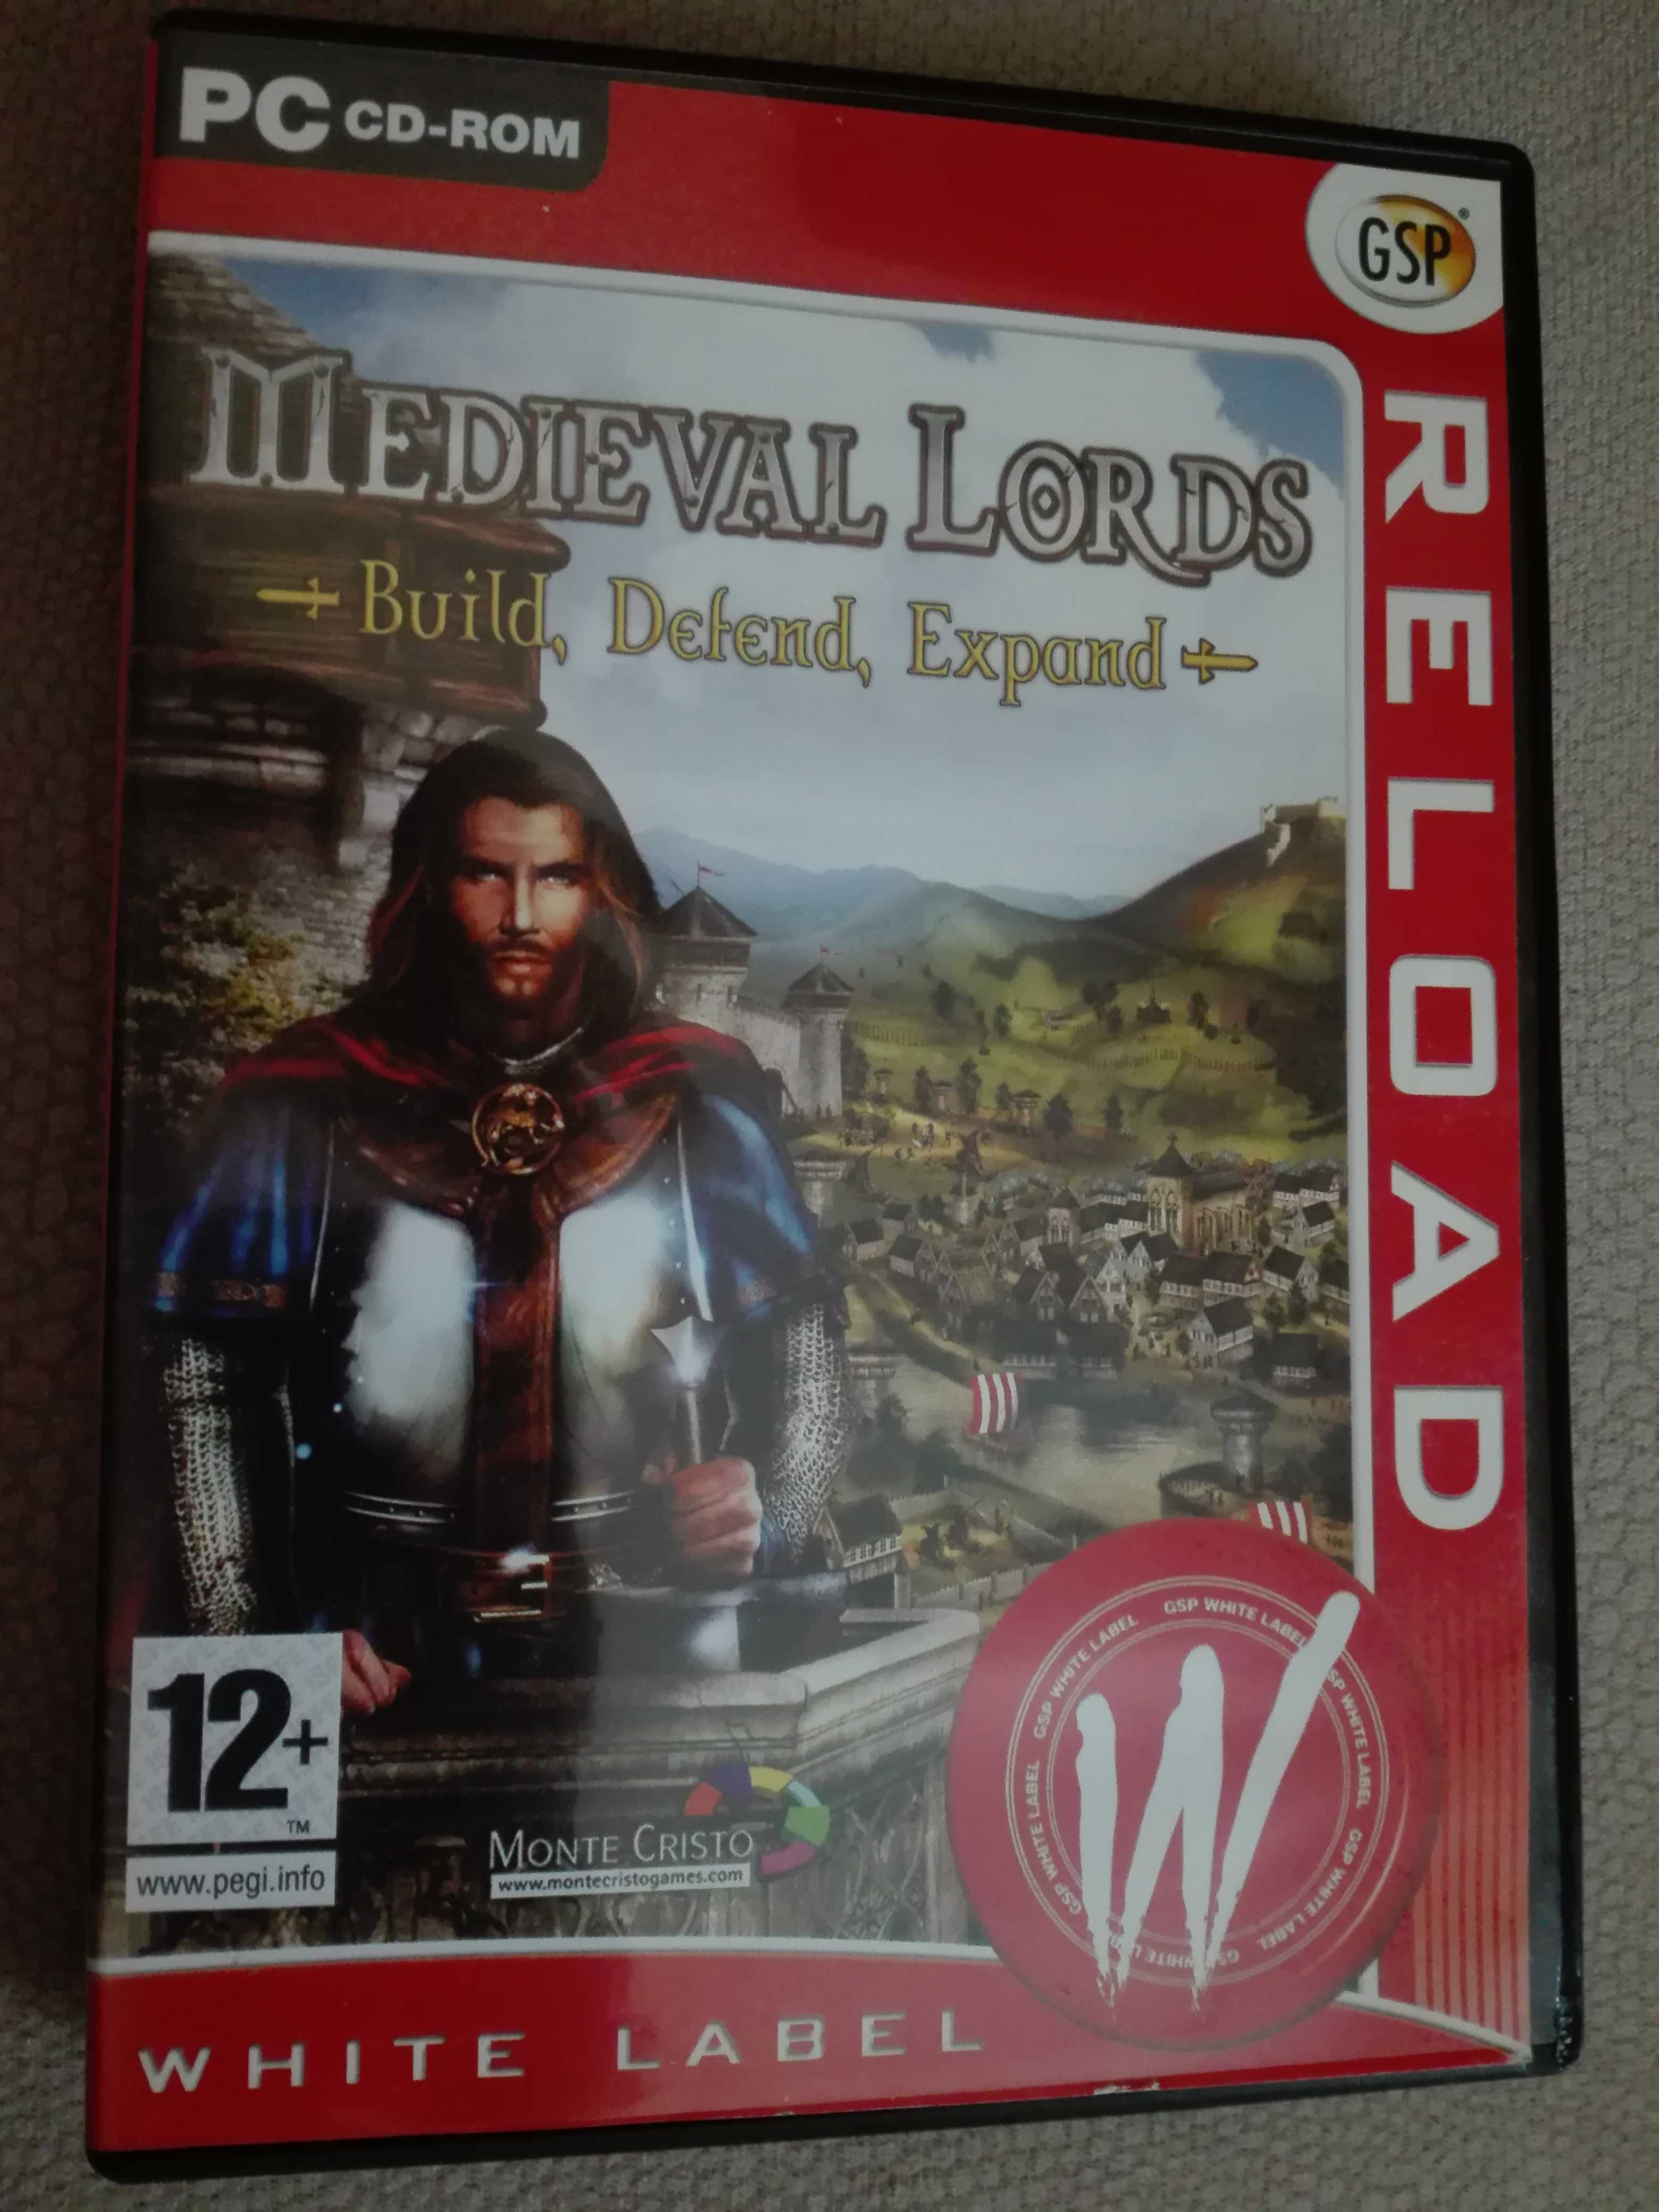 "Medieval Lords Build Defend Expand" - gra PC CD - ROM